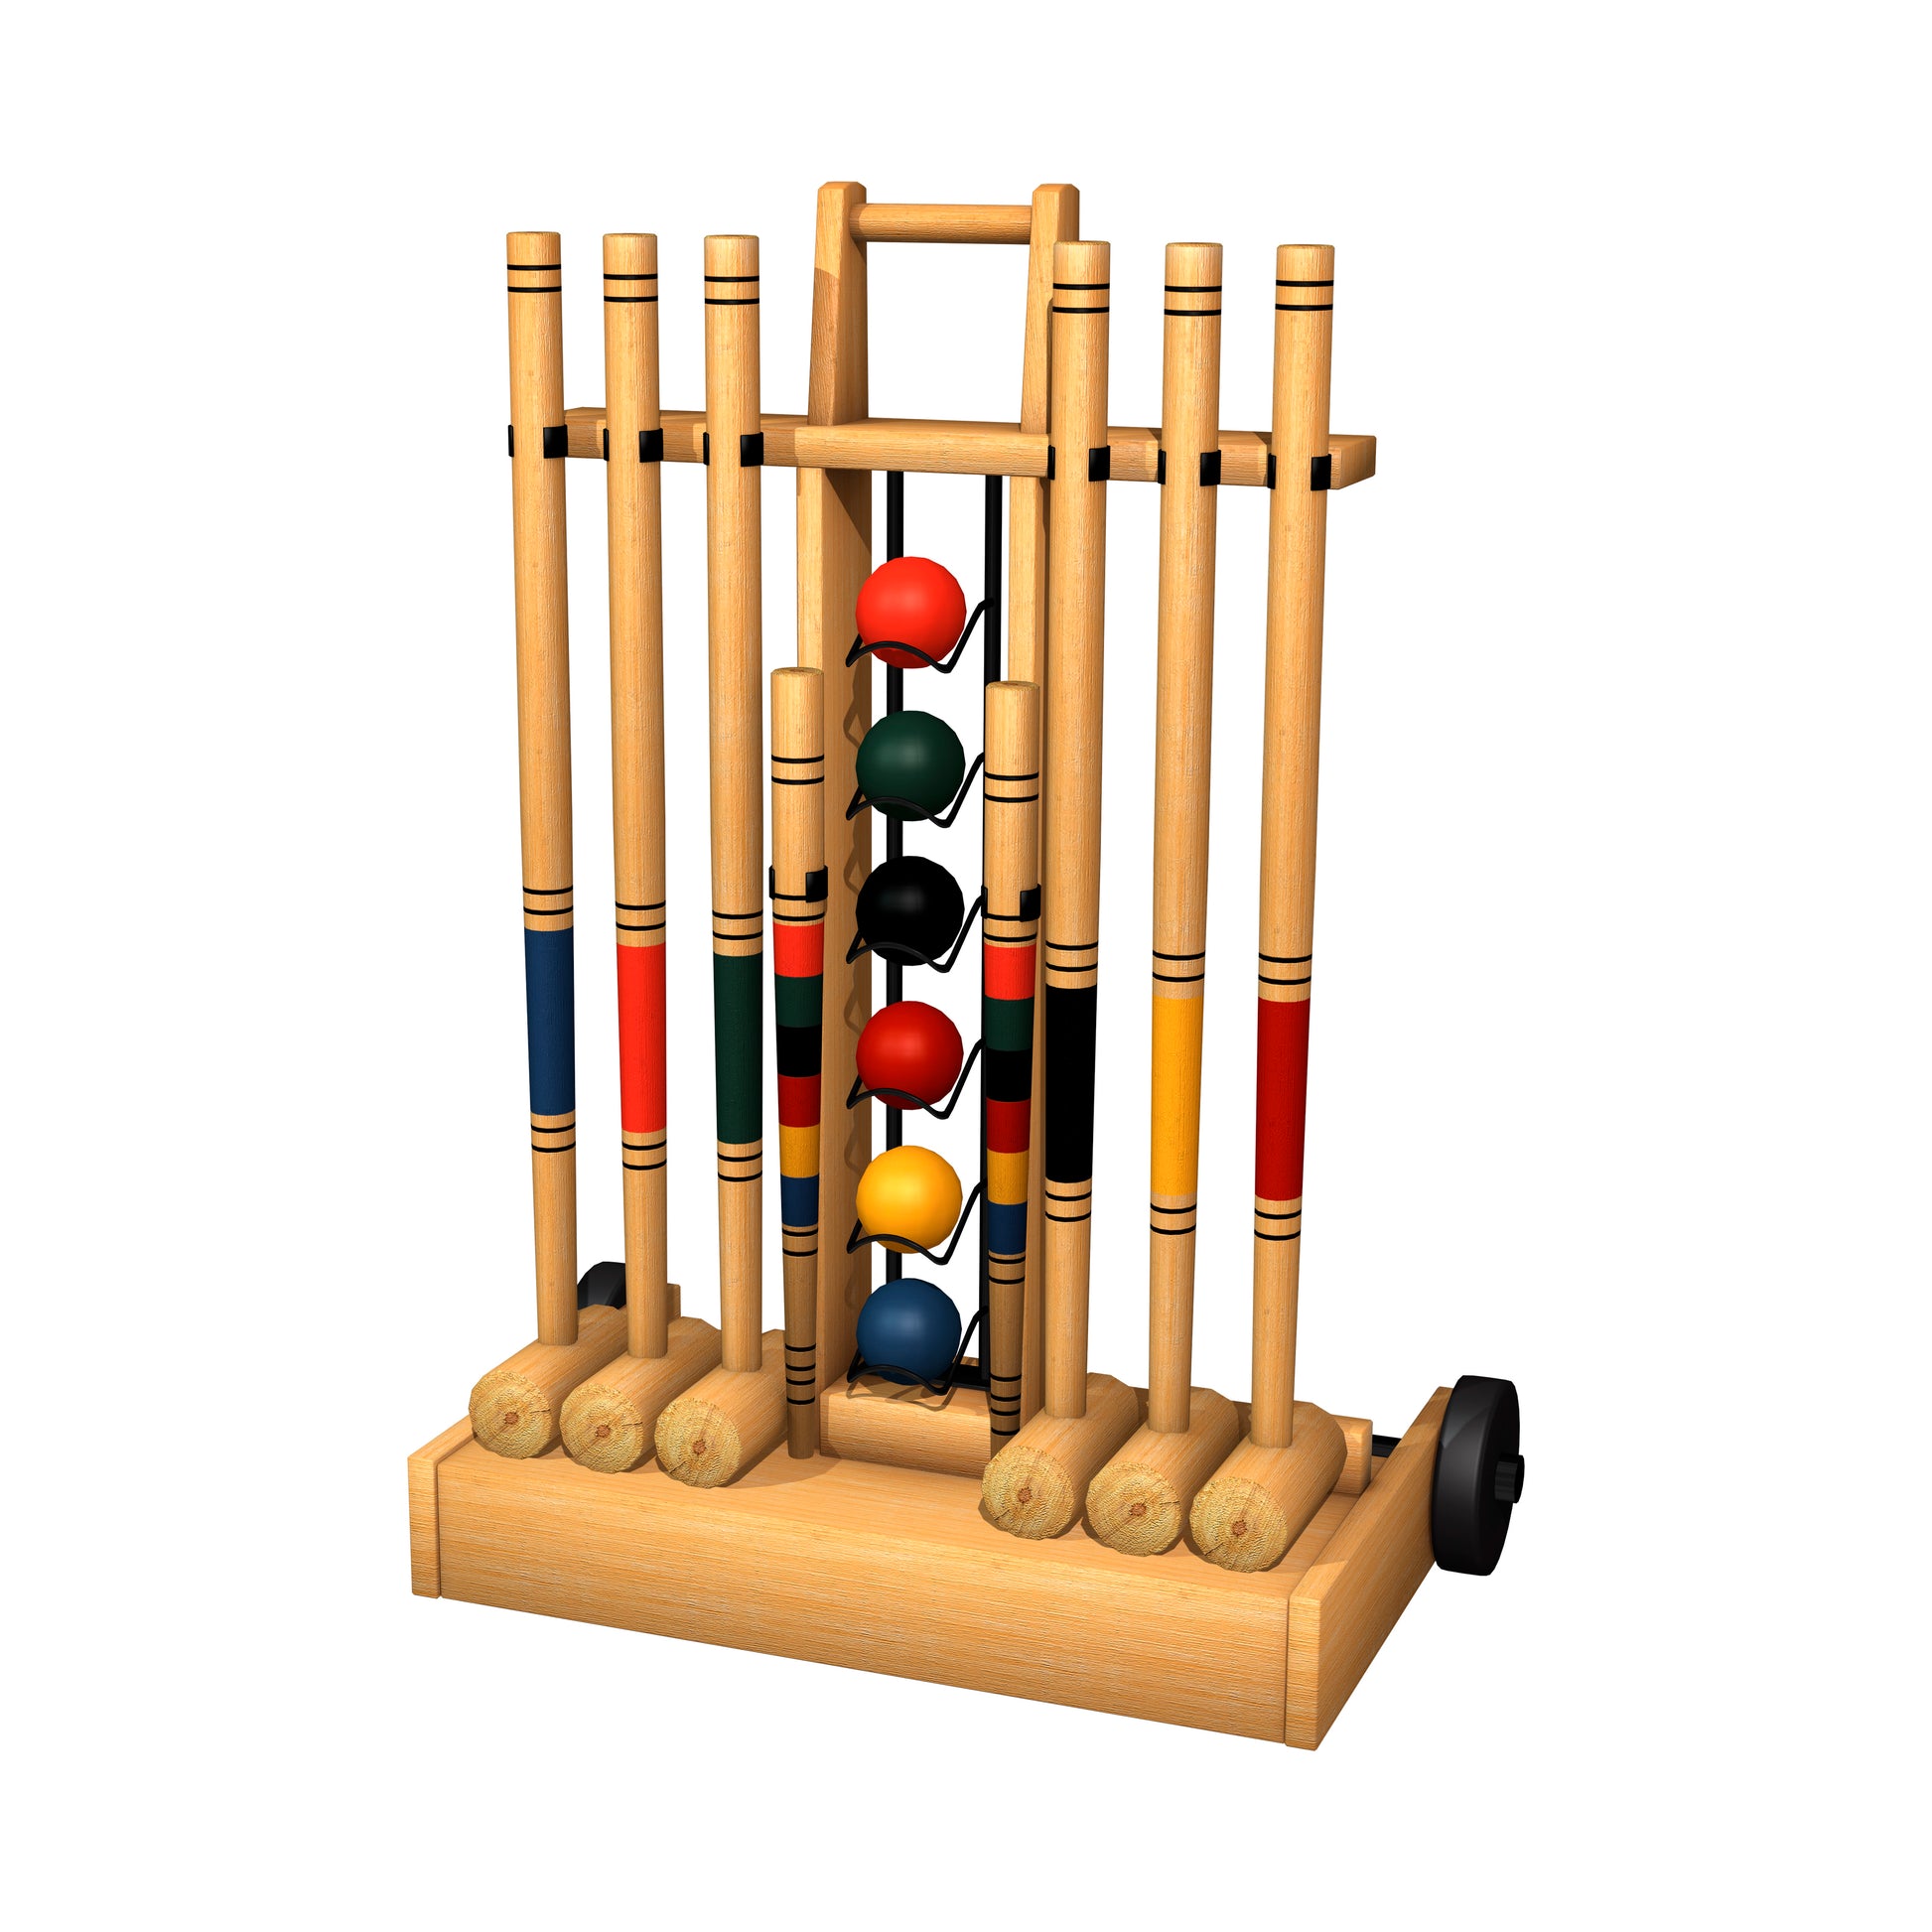 A wooden croquet set in a stand containing six croquet batons and balls